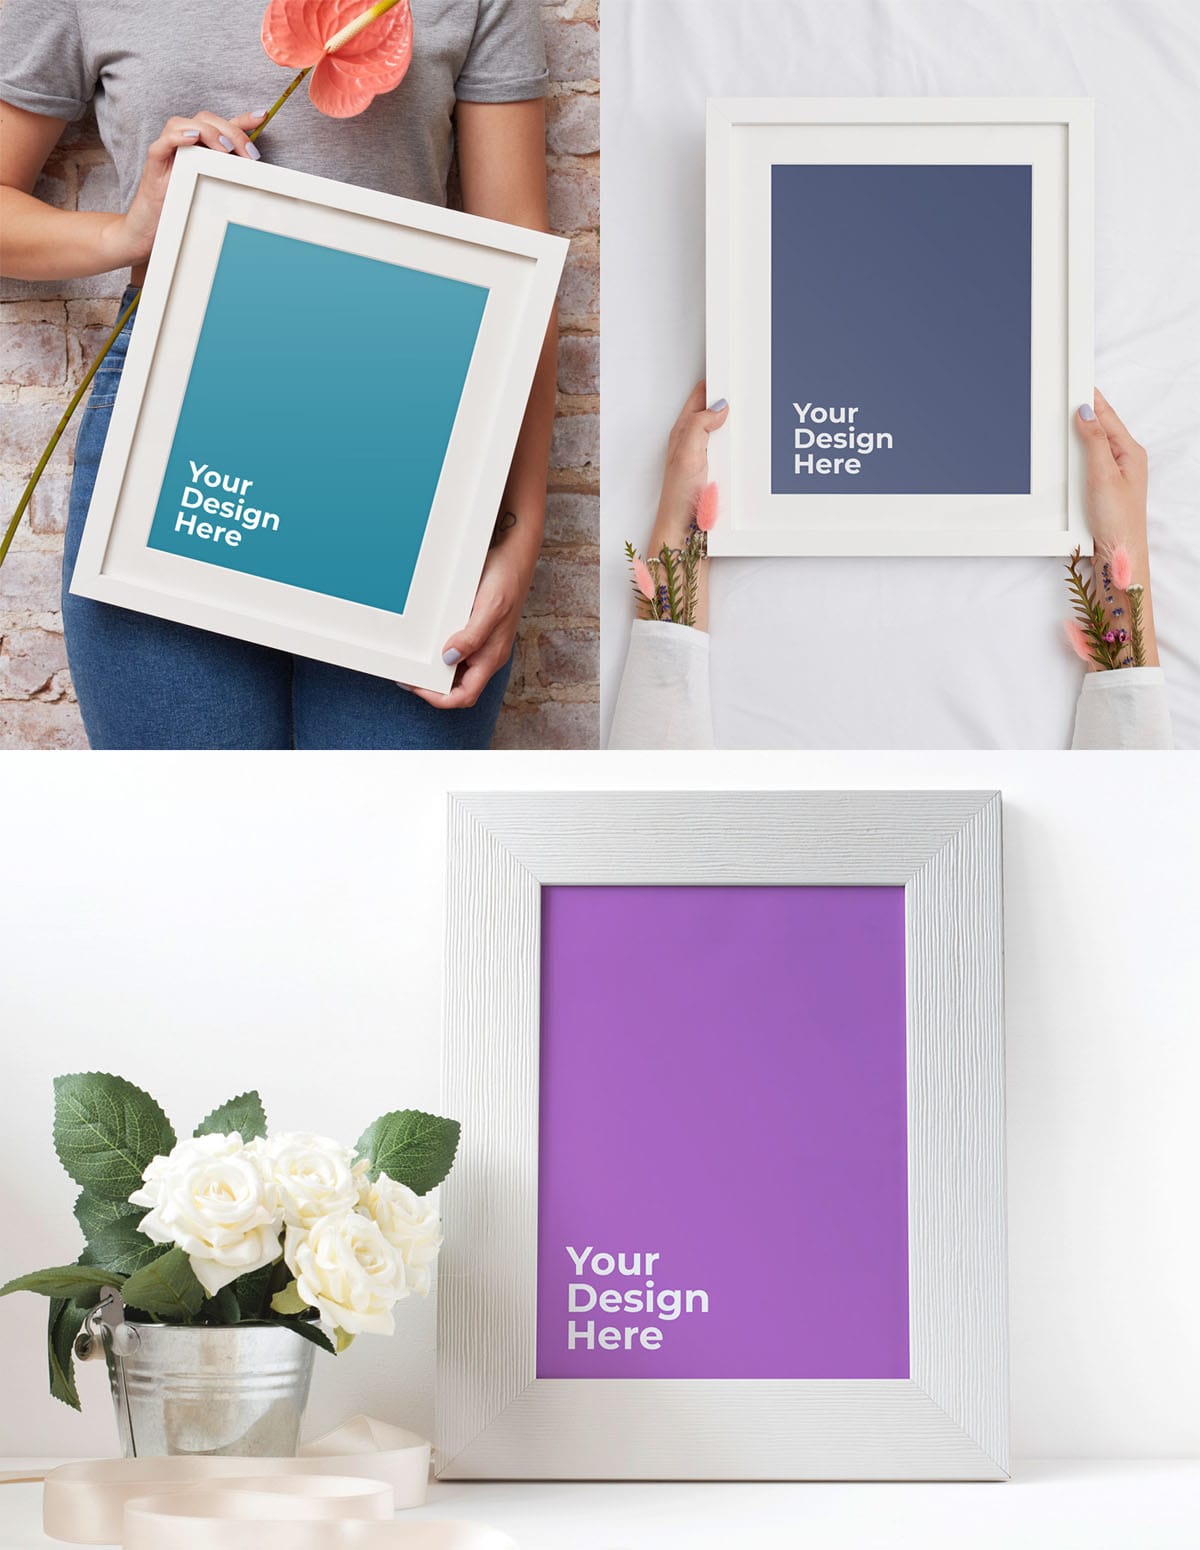 Download 4 Free Photo Frame Mockups PSD - Find the Perfect Creative Mockups Freebies to Showcase your ...